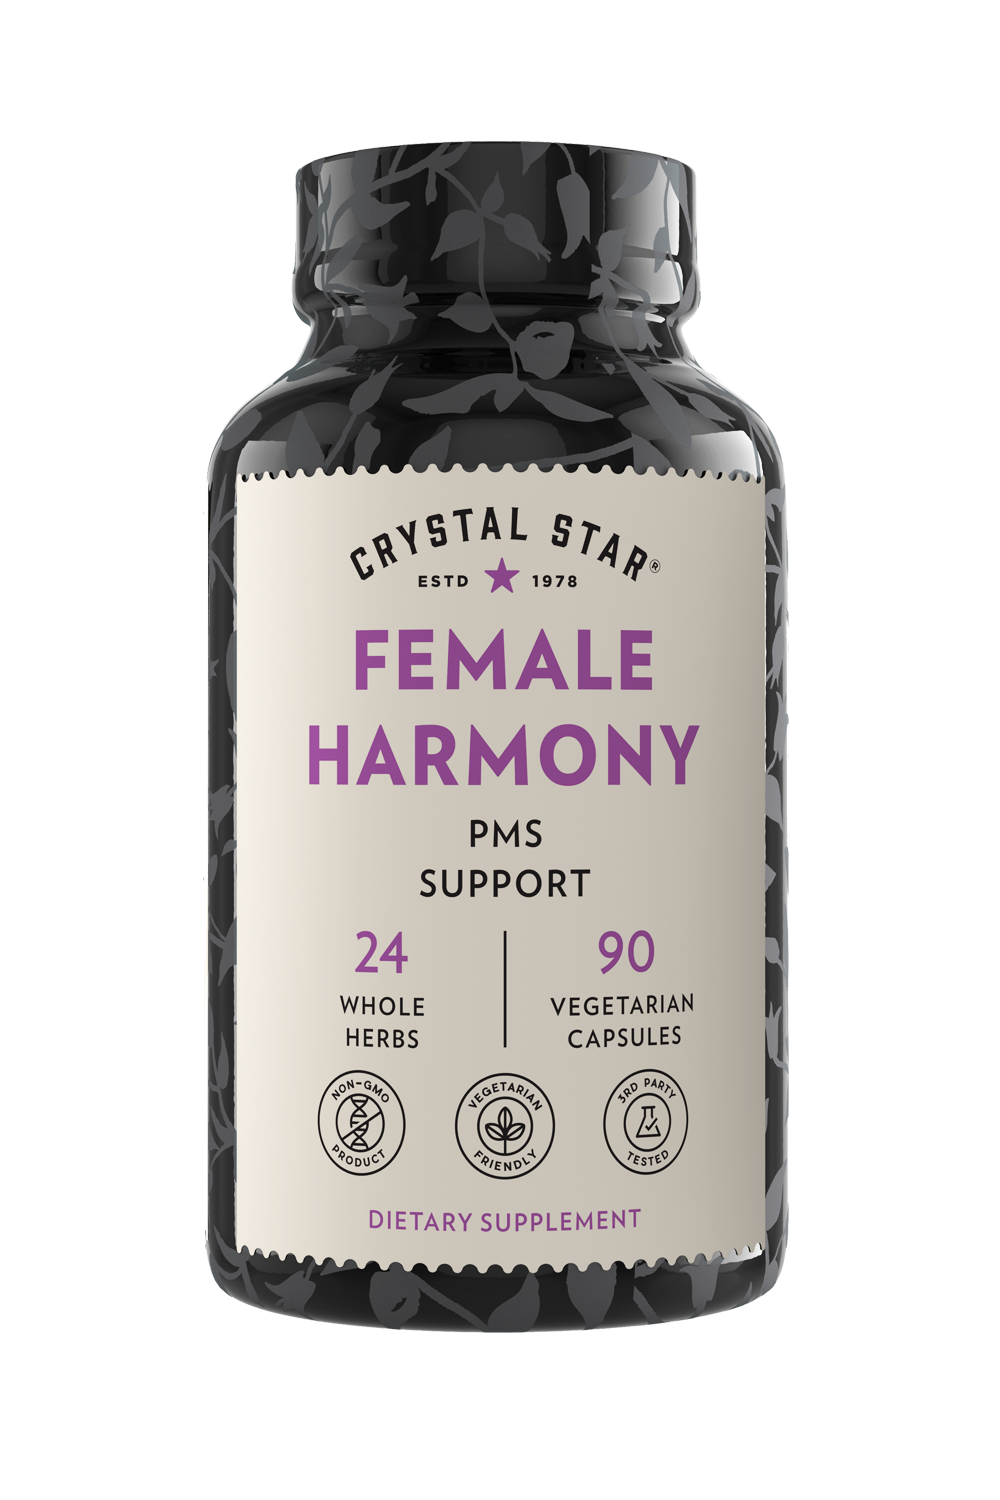 Crystal Star Female Harmony supplement for PMS support, 90Count